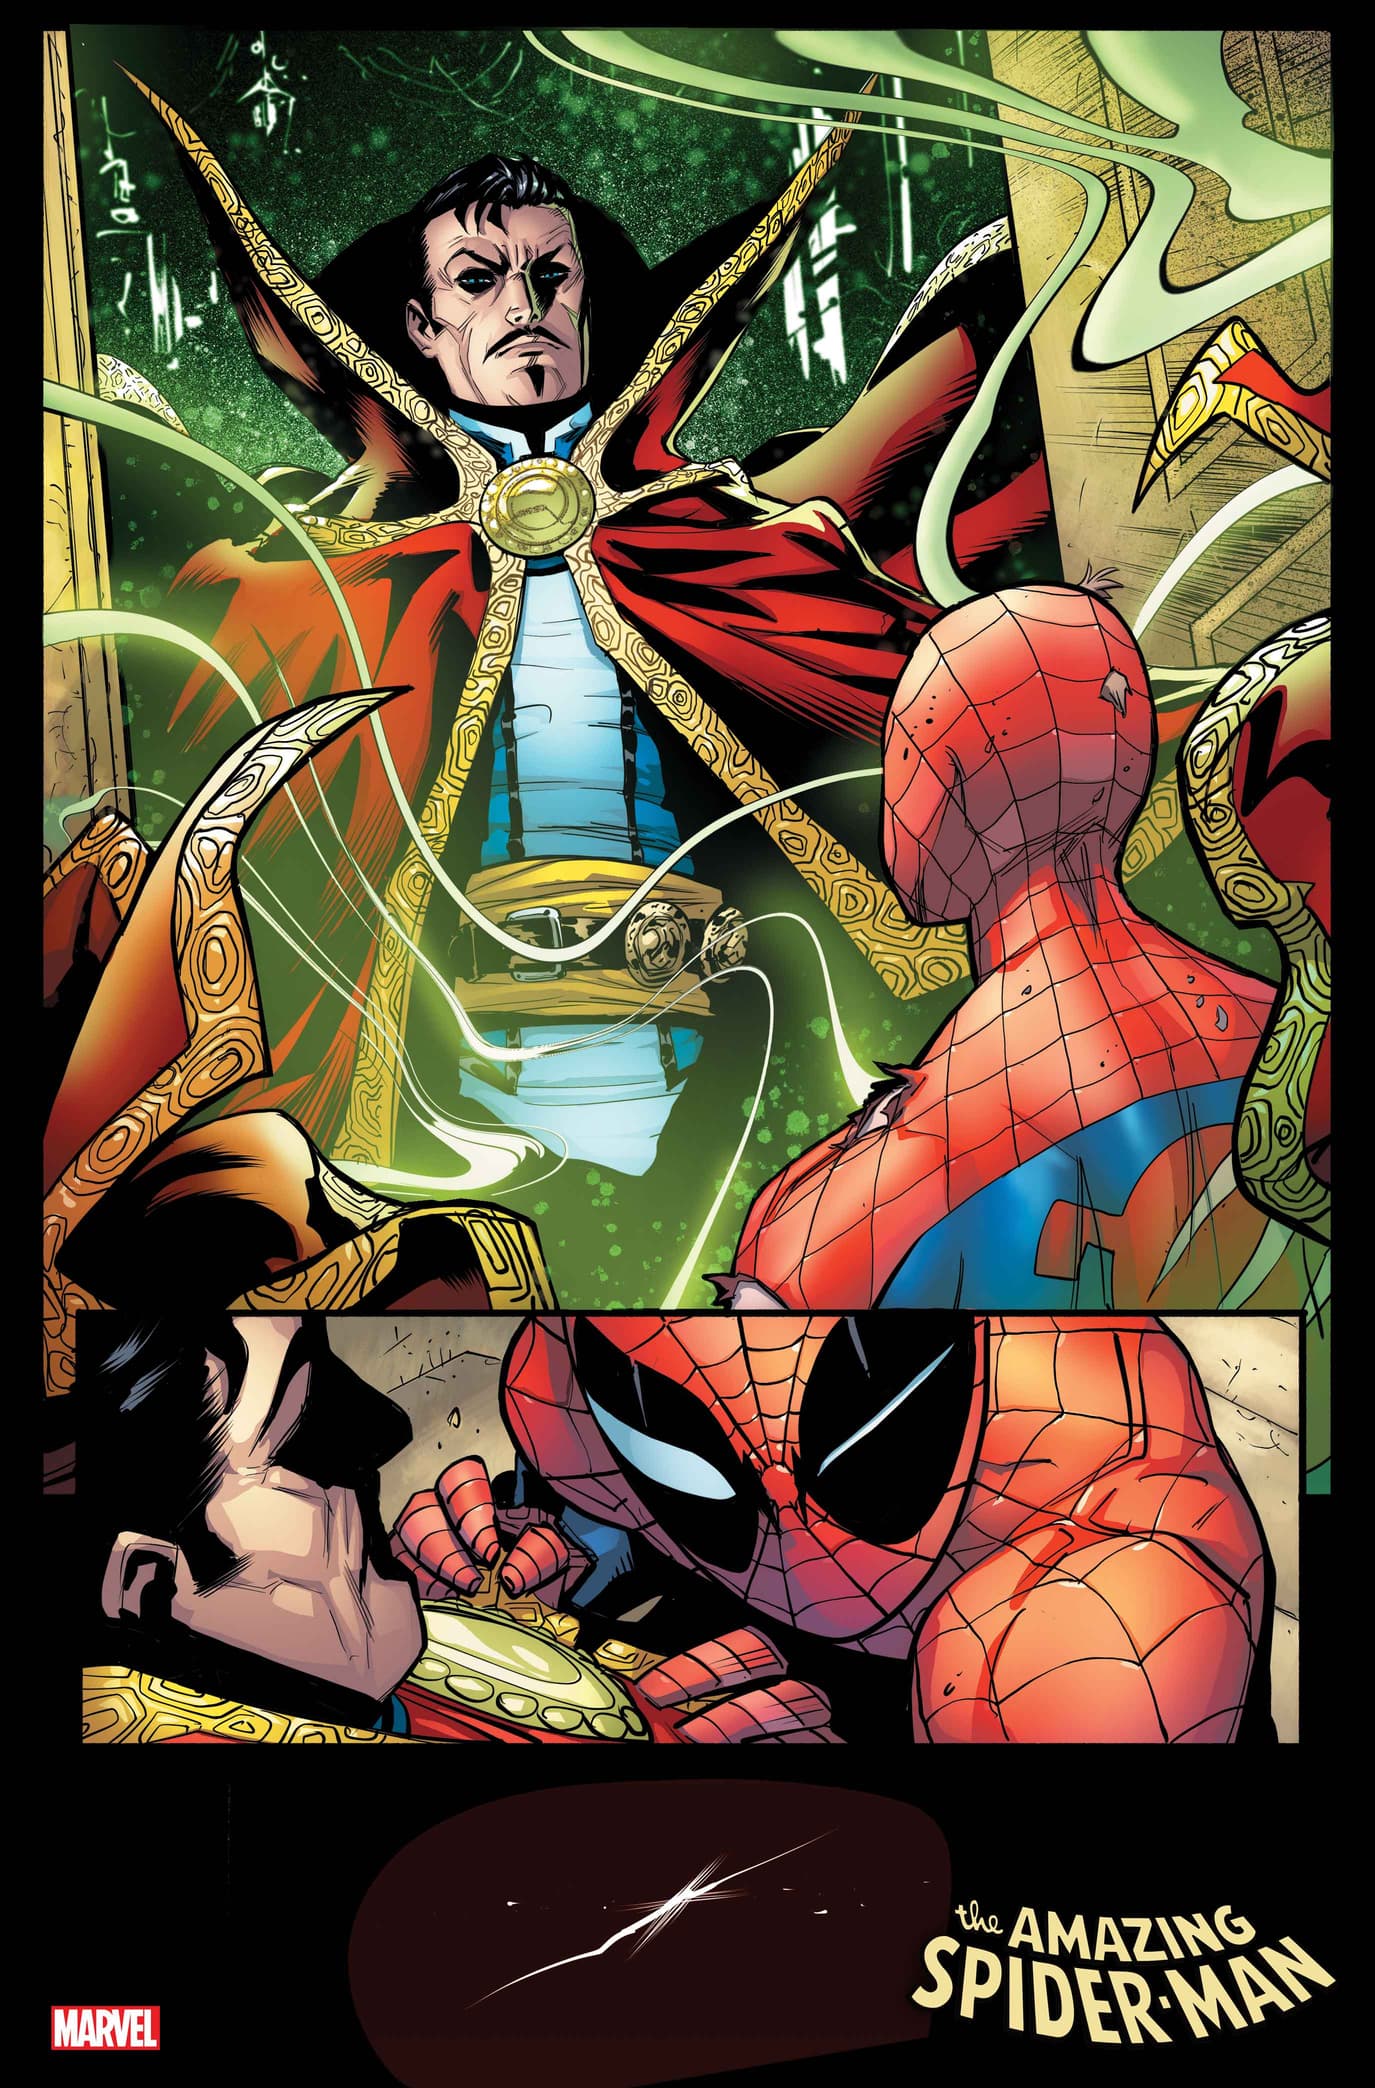 AMAZING SPIDER-MAN #50 preview interiors by Patrick Gleason and Edgar Delgado